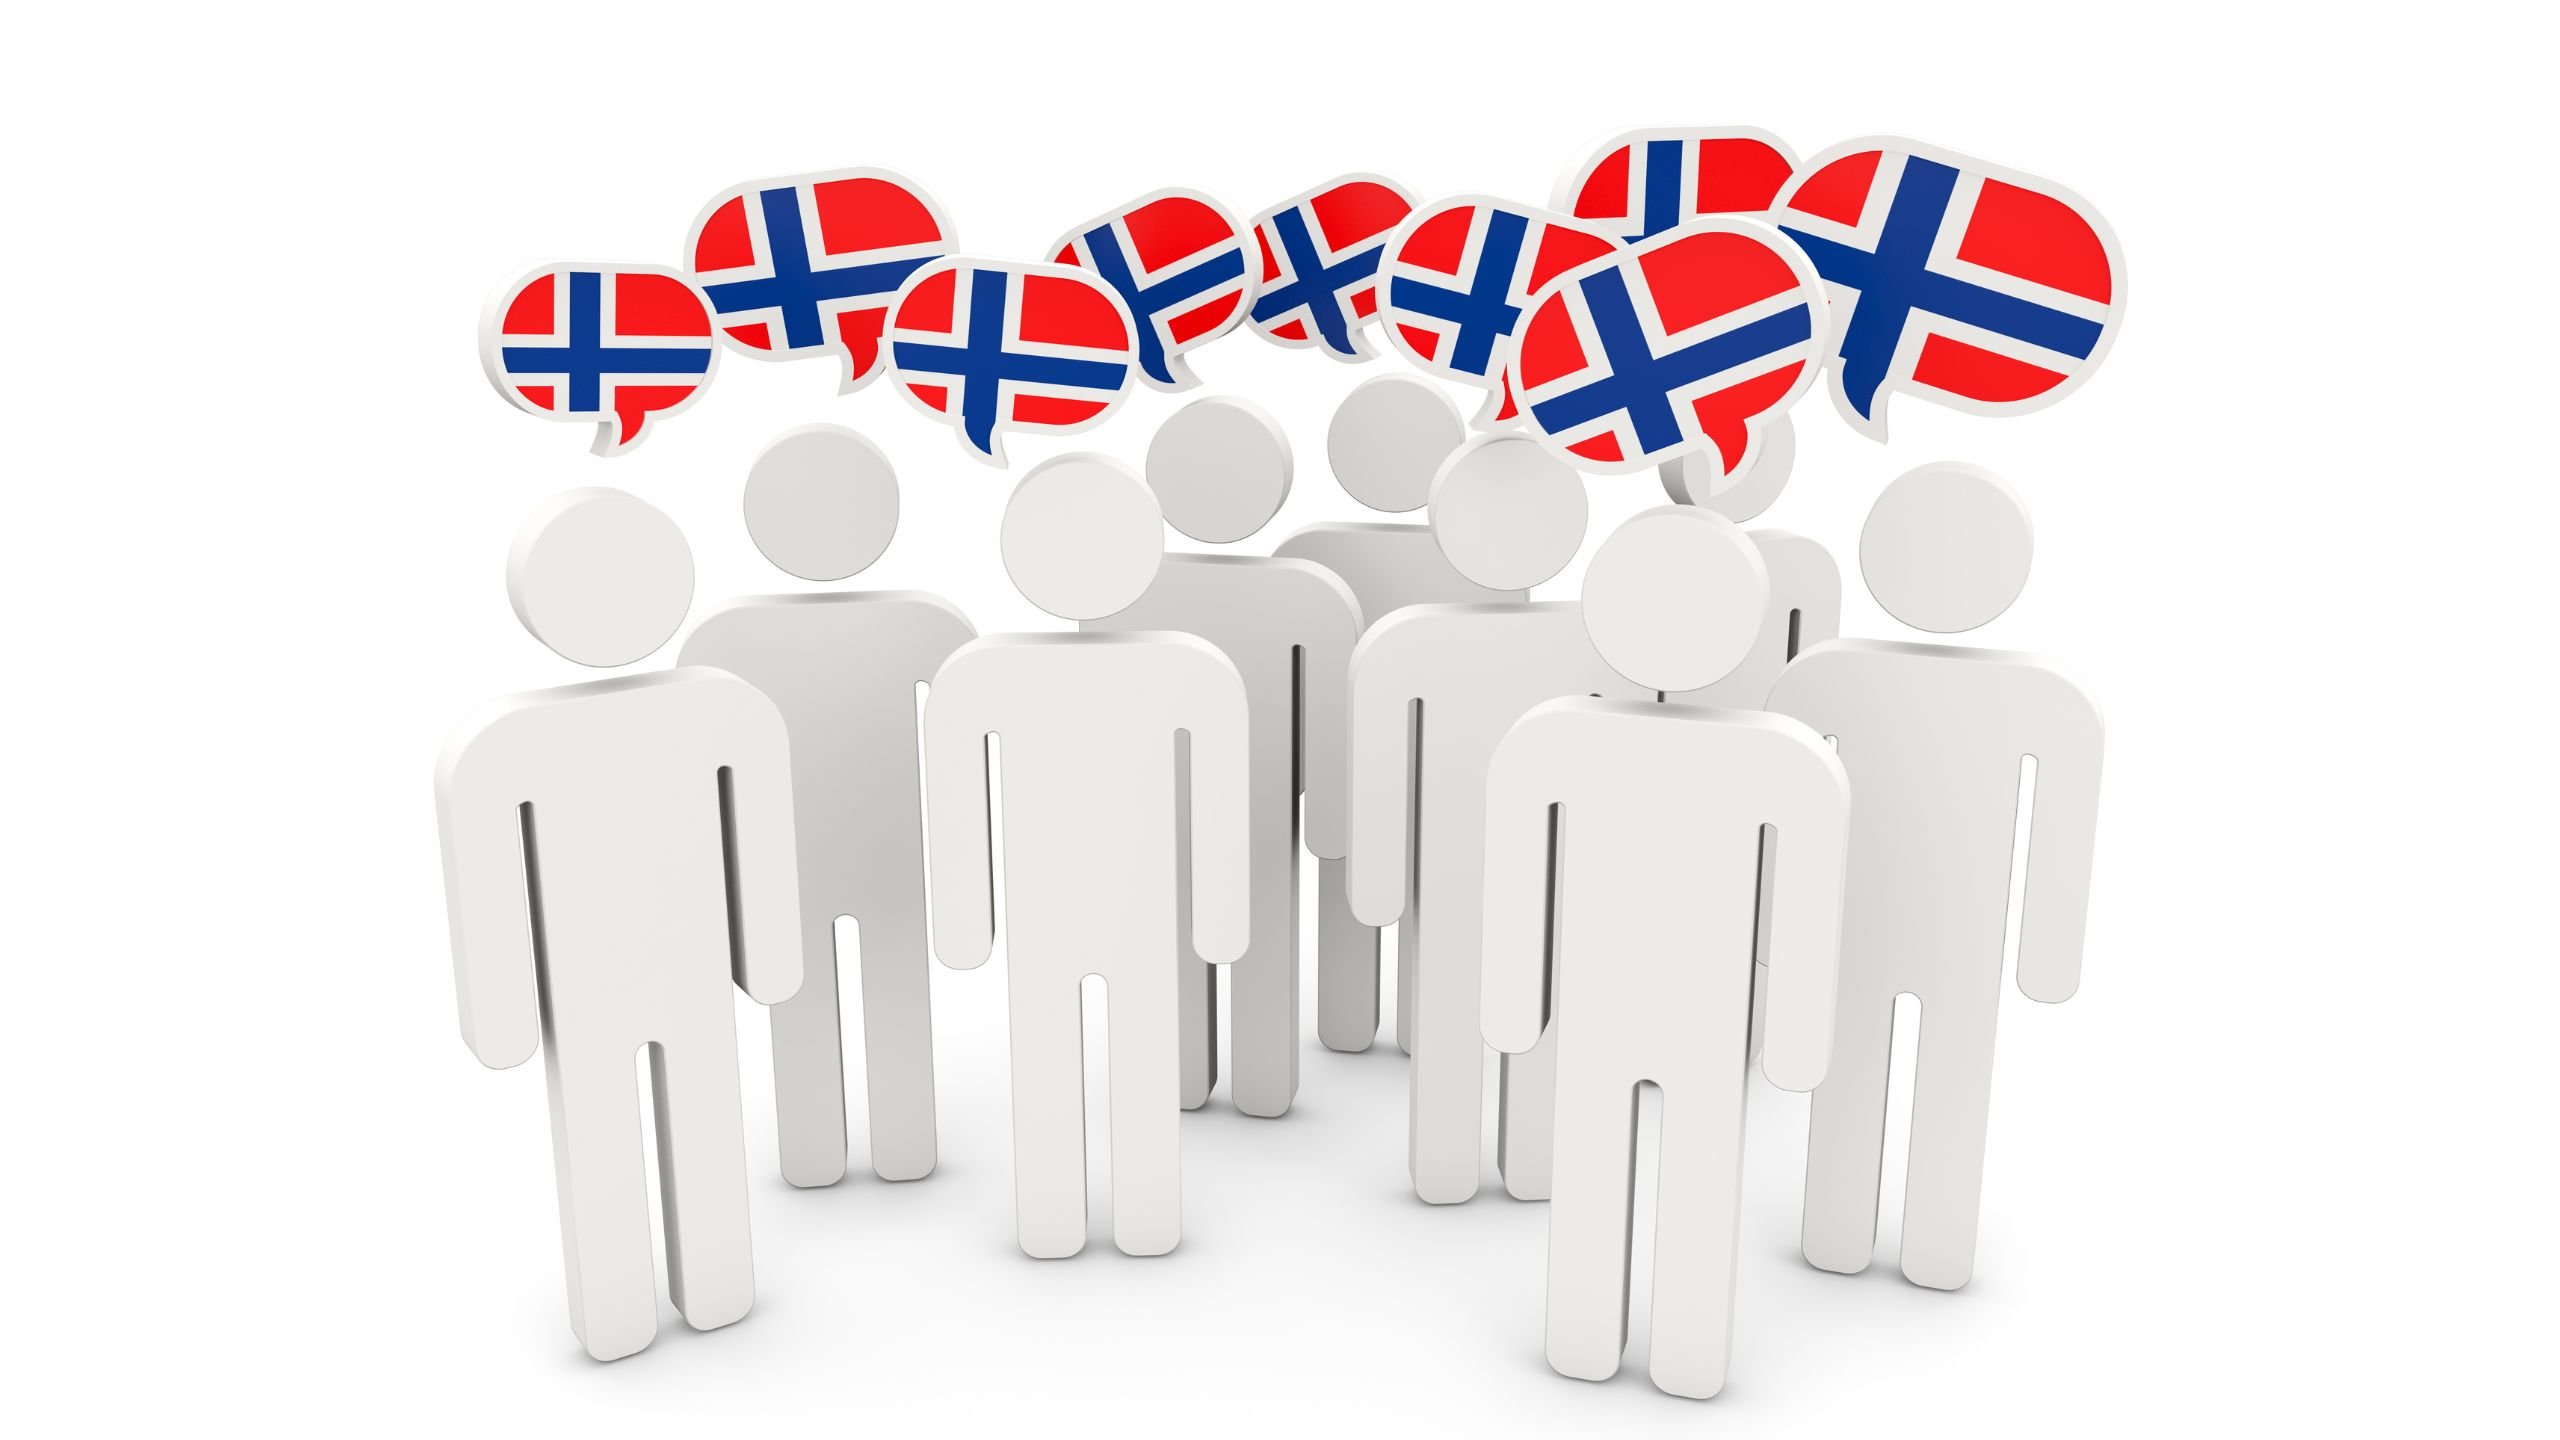 Norway people with opinions concept image.